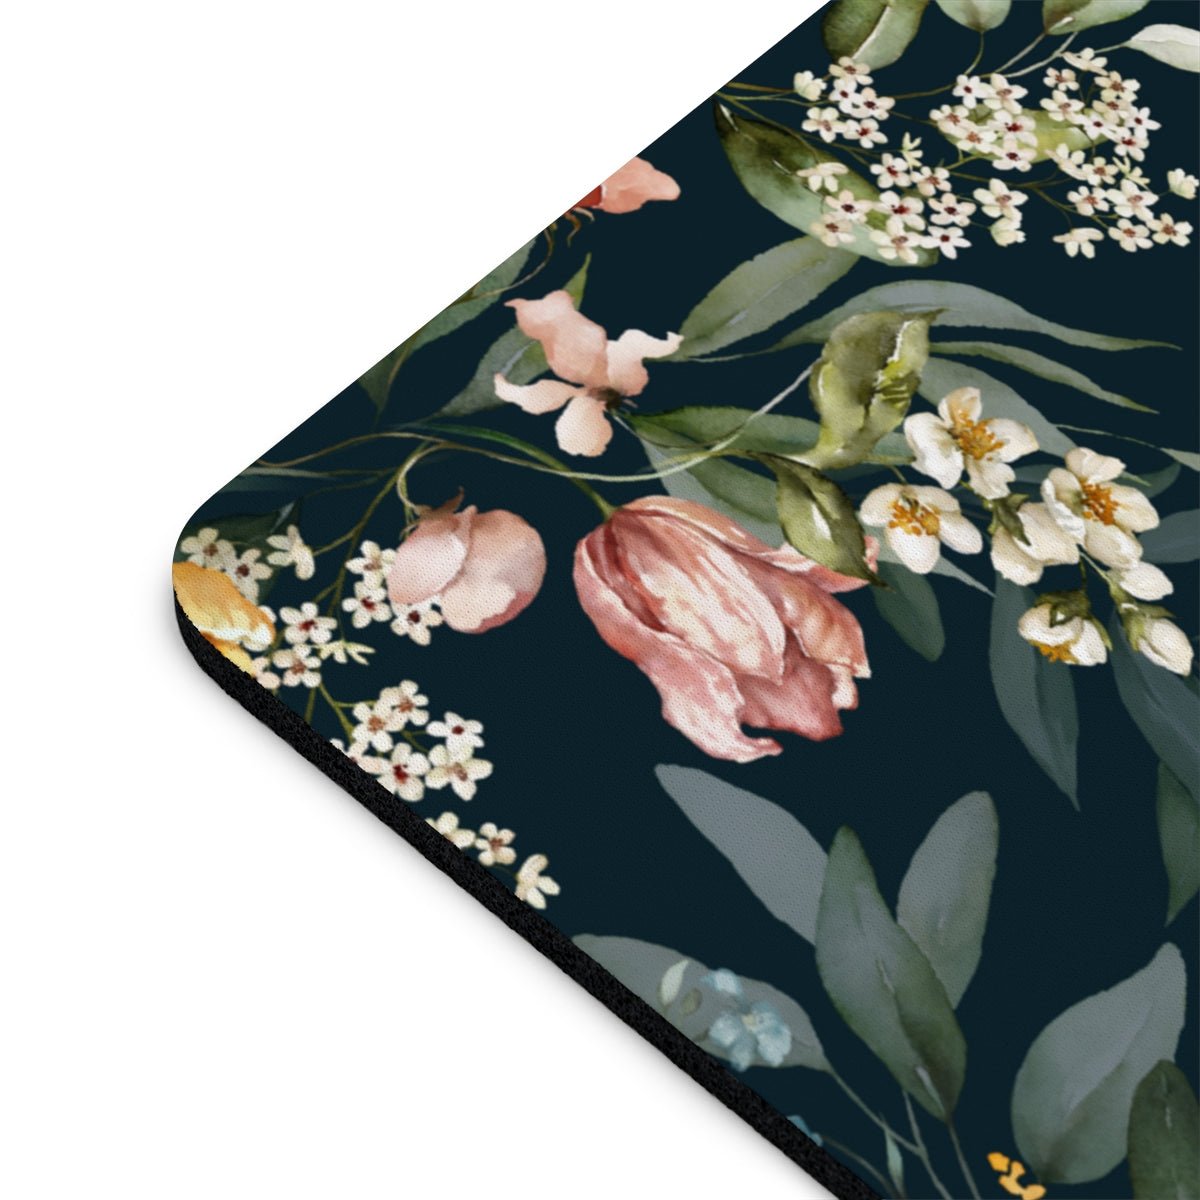 Watercolor Flowers Mouse Pad - Puffin Lime